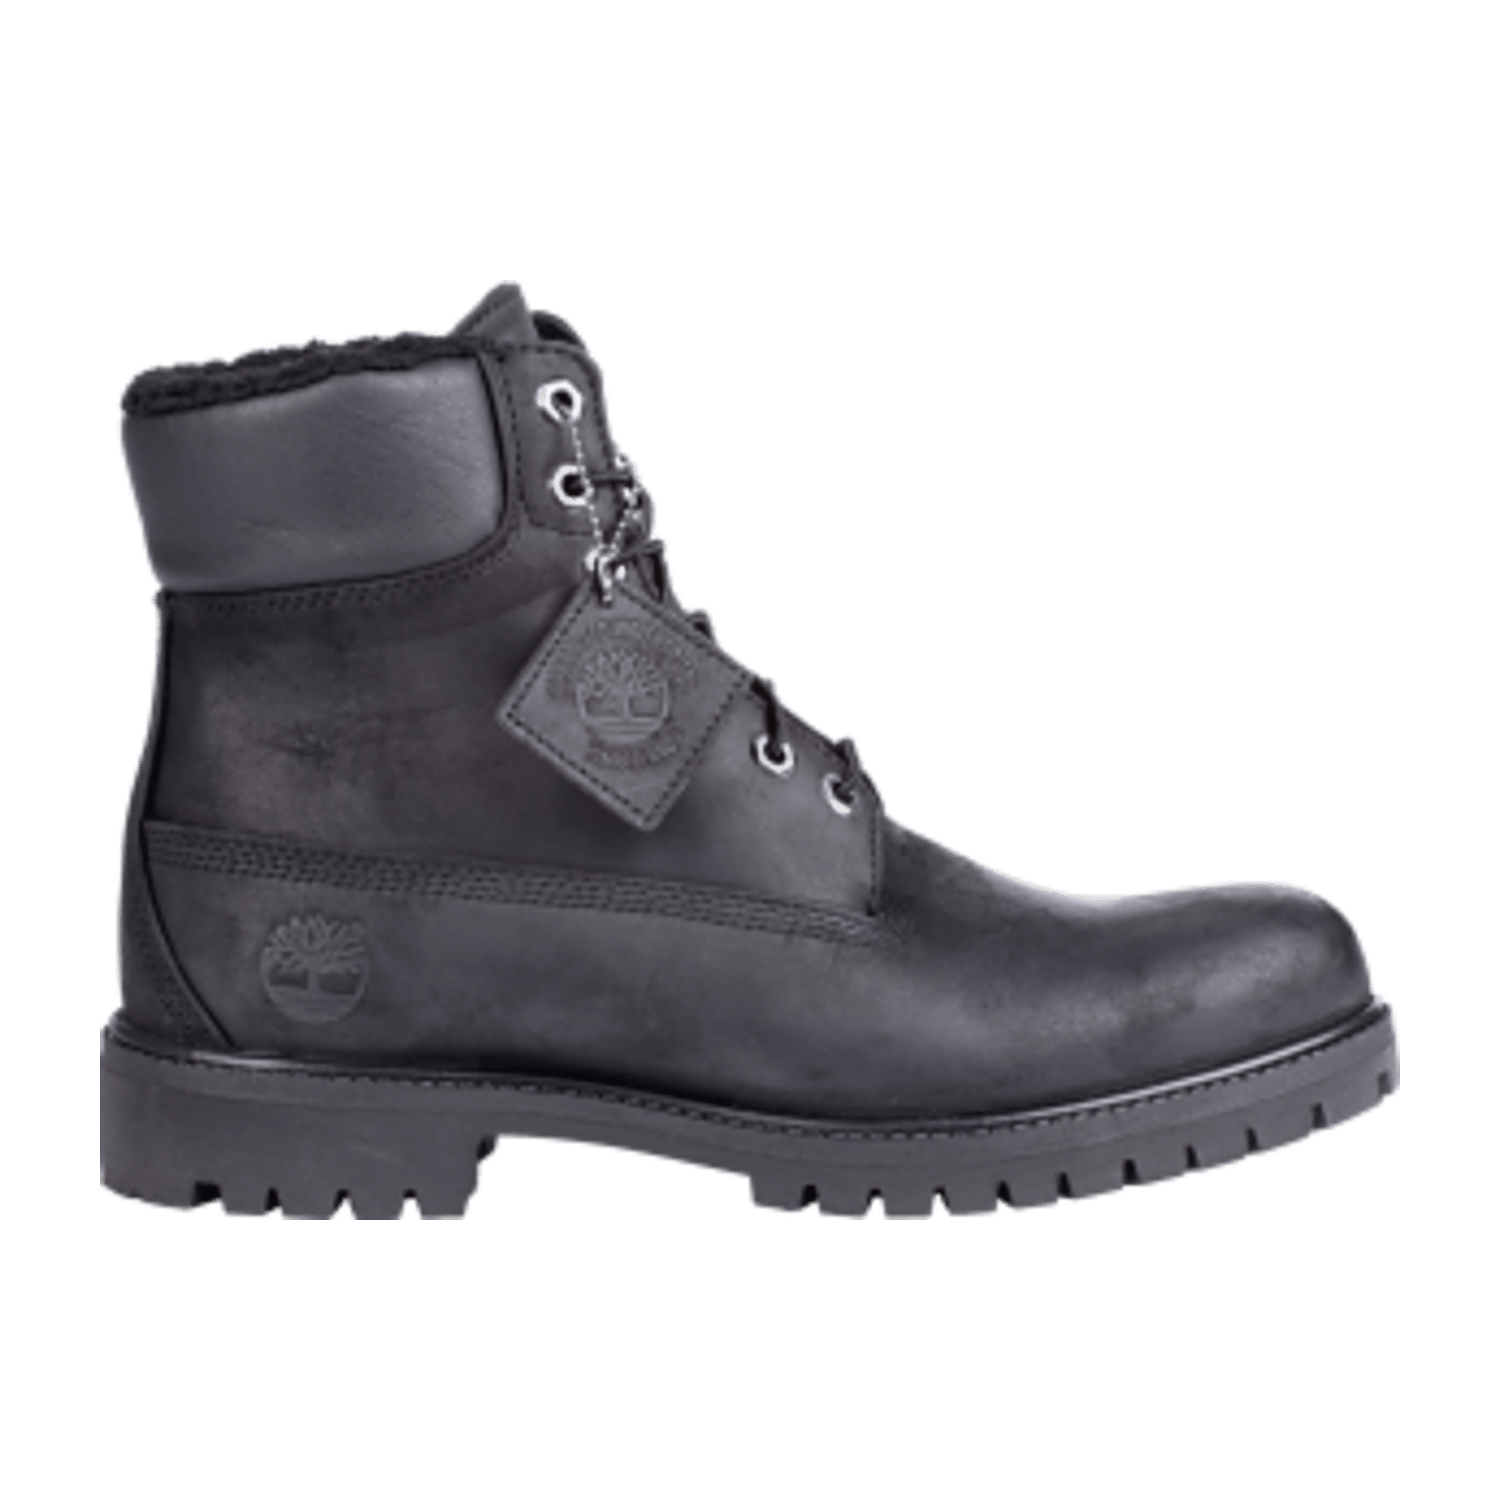 Timberland 6 Inch Premium Fur Warm Lined Boot